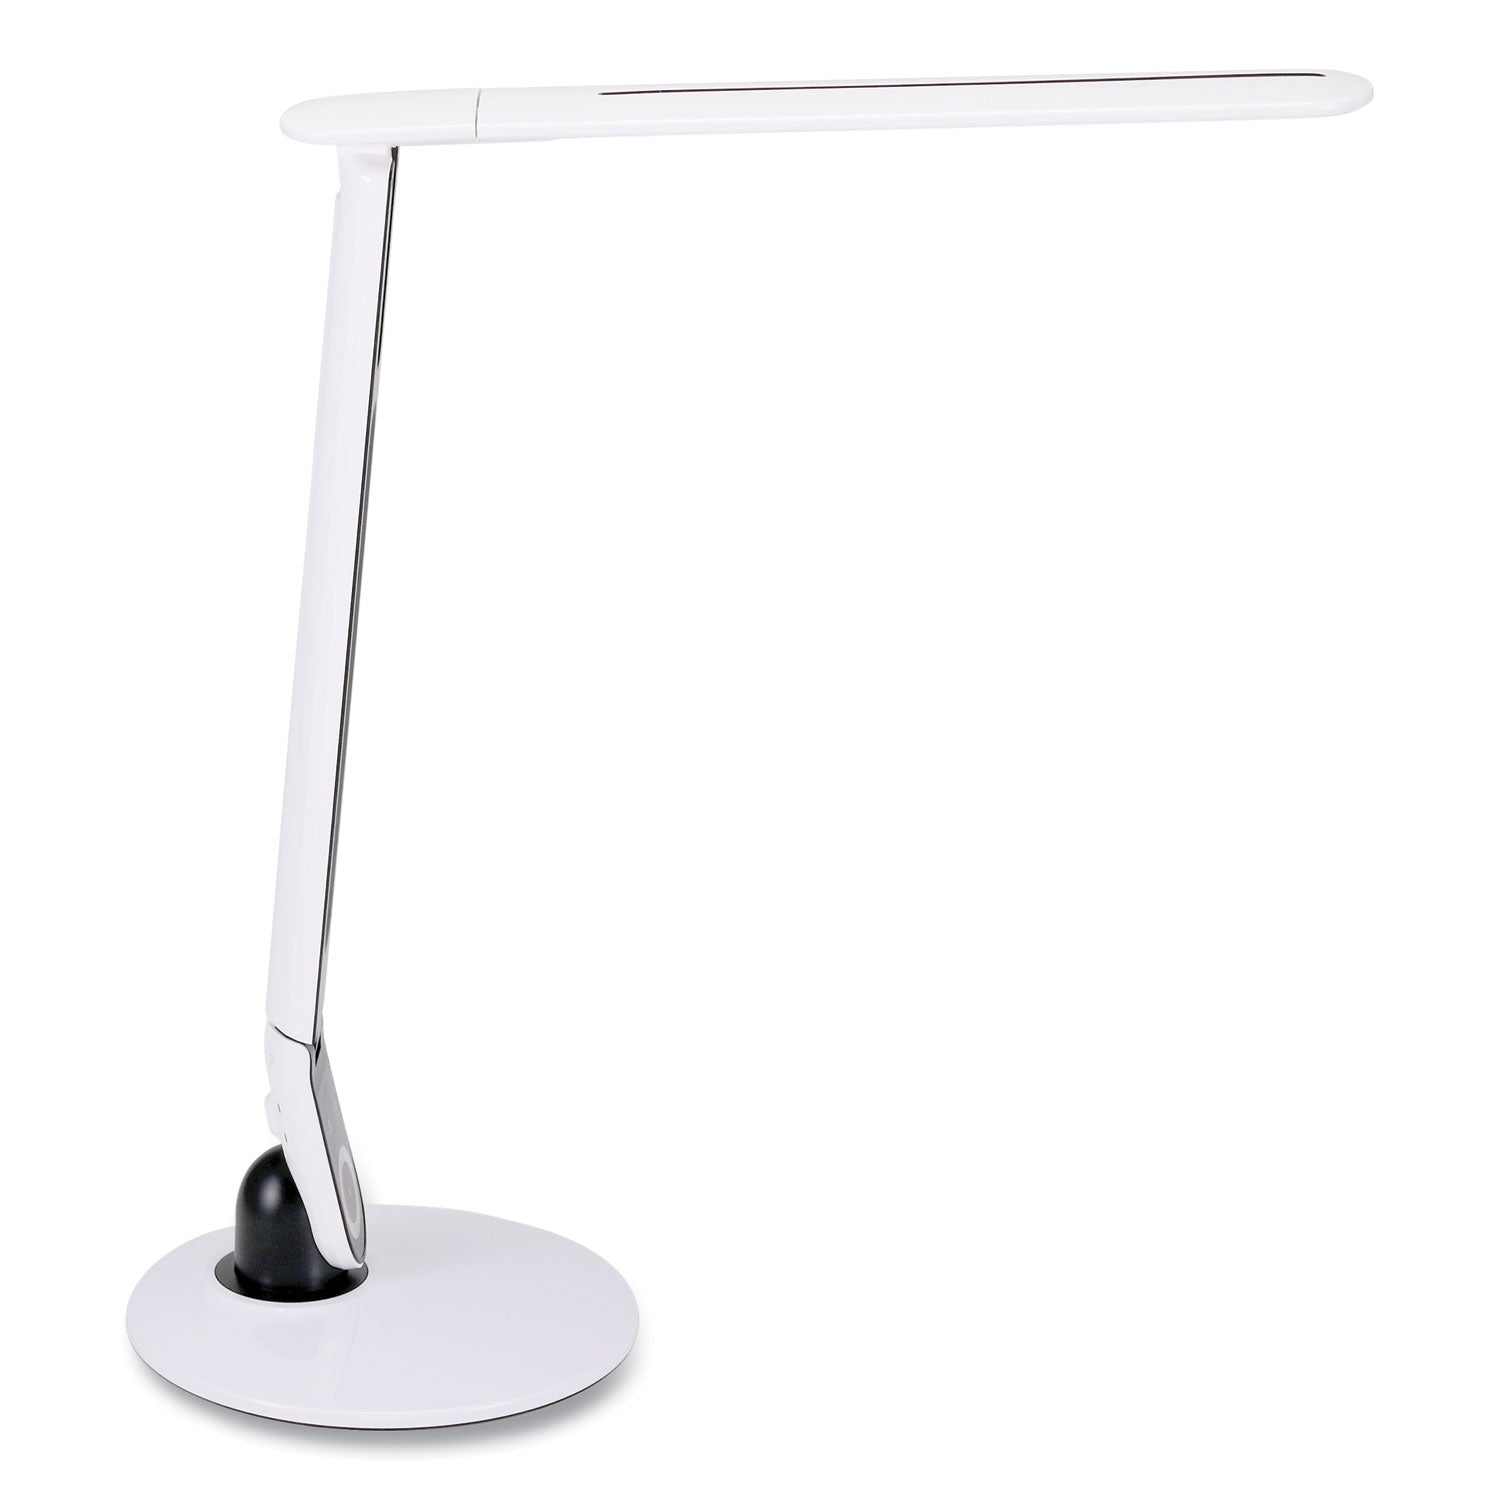 color-changing-led-desk-lamp-with-rgb-arm-1812-high-white_bosvled1605bos - 2